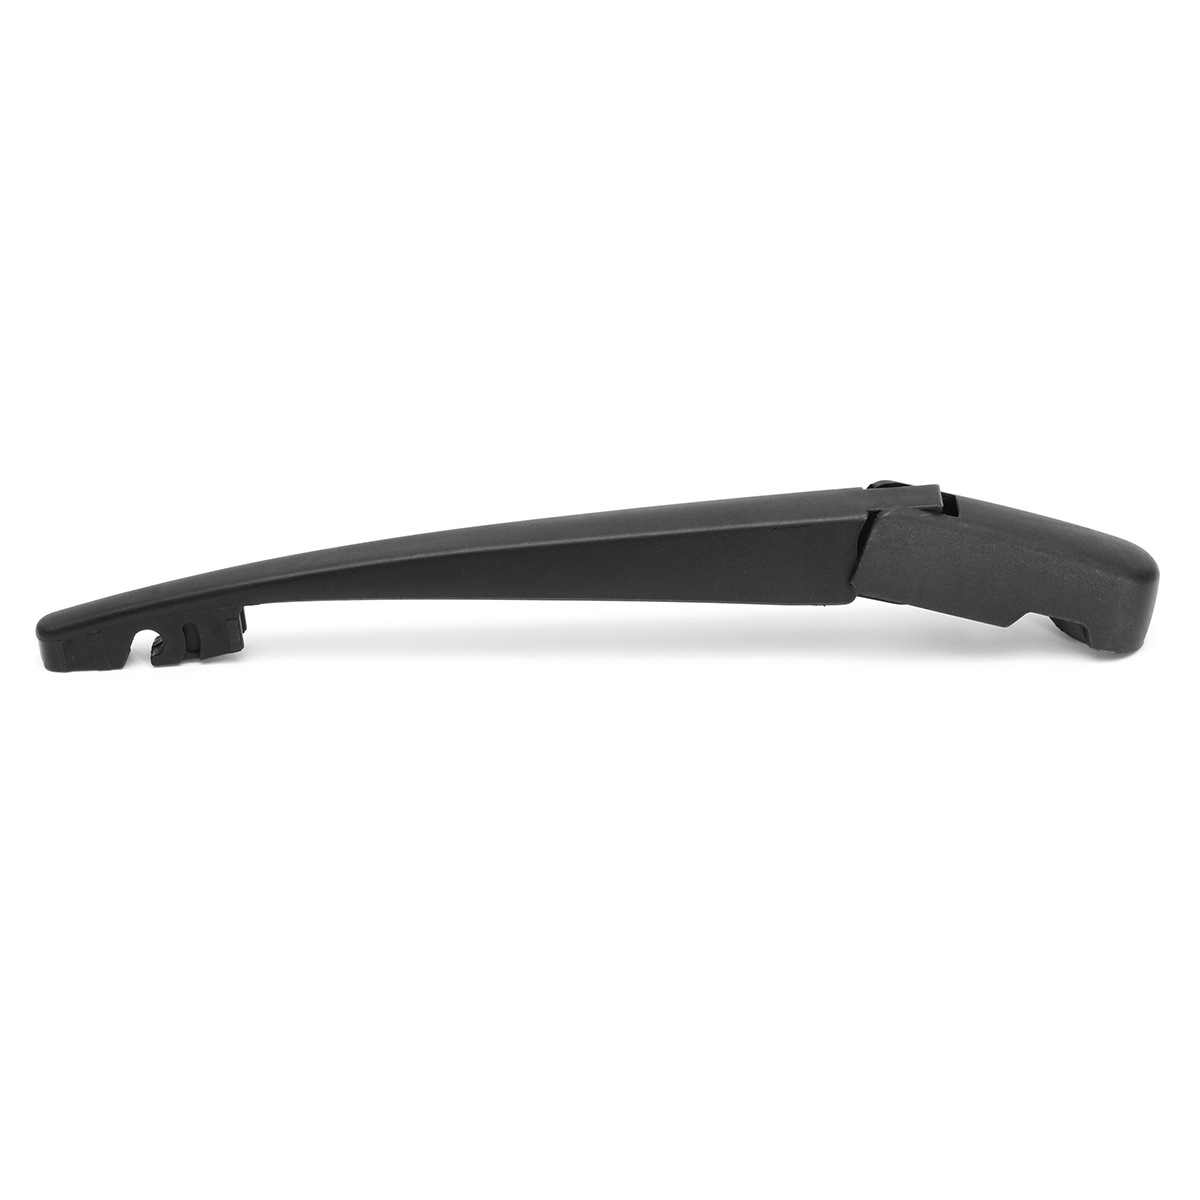 Car Rear Window Wind Shield Wiper Arm With Cover Fit For Honda Pilot 2003-2008 2